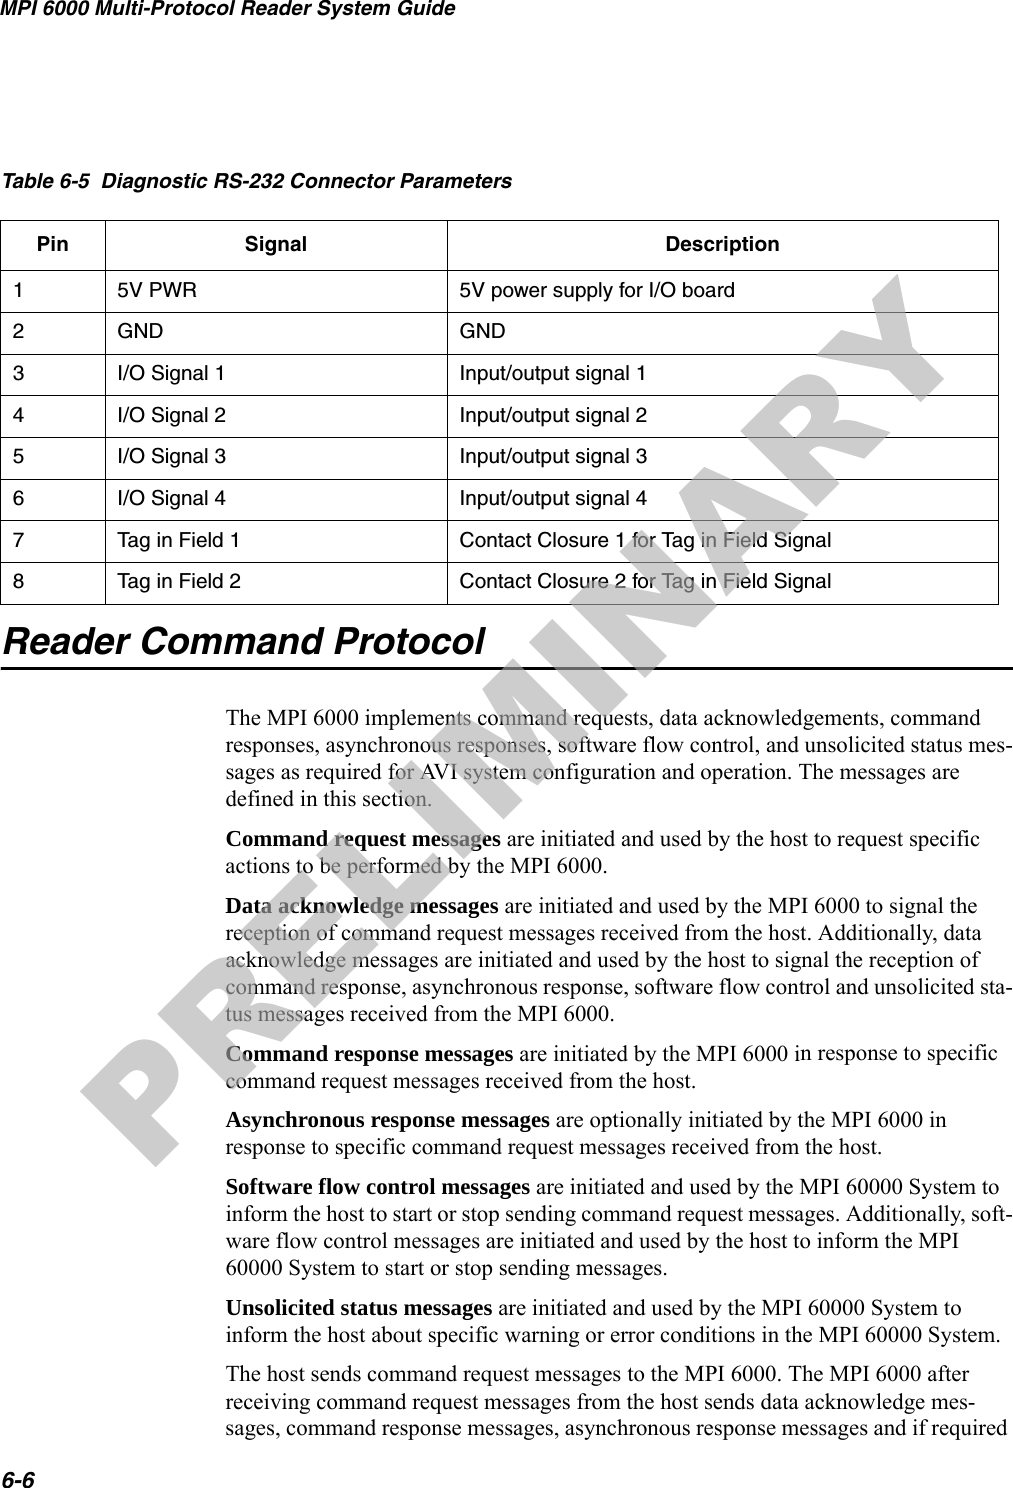 MPI 6000 Multi-Protocol Reader System Guide6-6Reader Command ProtocolThe MPI 6000 implements command requests, data acknowledgements, command responses, asynchronous responses, software flow control, and unsolicited status mes-sages as required for AVI system configuration and operation. The messages are defined in this section.Command request messages are initiated and used by the host to request specific actions to be performed by the MPI 6000.Data acknowledge messages are initiated and used by the MPI 6000 to signal the reception of command request messages received from the host. Additionally, data acknowledge messages are initiated and used by the host to signal the reception of command response, asynchronous response, software flow control and unsolicited sta-tus messages received from the MPI 6000. Command response messages are initiated by the MPI 6000 in response to specific command request messages received from the host.Asynchronous response messages are optionally initiated by the MPI 6000 in response to specific command request messages received from the host.Software flow control messages are initiated and used by the MPI 60000 System to inform the host to start or stop sending command request messages. Additionally, soft-ware flow control messages are initiated and used by the host to inform the MPI 60000 System to start or stop sending messages.Unsolicited status messages are initiated and used by the MPI 60000 System to inform the host about specific warning or error conditions in the MPI 60000 System.The host sends command request messages to the MPI 6000. The MPI 6000 after receiving command request messages from the host sends data acknowledge mes-sages, command response messages, asynchronous response messages and if required Table 6-5  Diagnostic RS-232 Connector ParametersPin Signal Description15V PWR 5V power supply for I/O board2GND GND3I/O Signal 1 Input/output signal 14I/O Signal 2 Input/output signal 25I/O Signal 3 Input/output signal 36I/O Signal 4 Input/output signal 47Tag in Field 1 Contact Closure 1 for Tag in Field Signal8Tag in Field 2 Contact Closure 2 for Tag in Field SignalPRELIMINARY